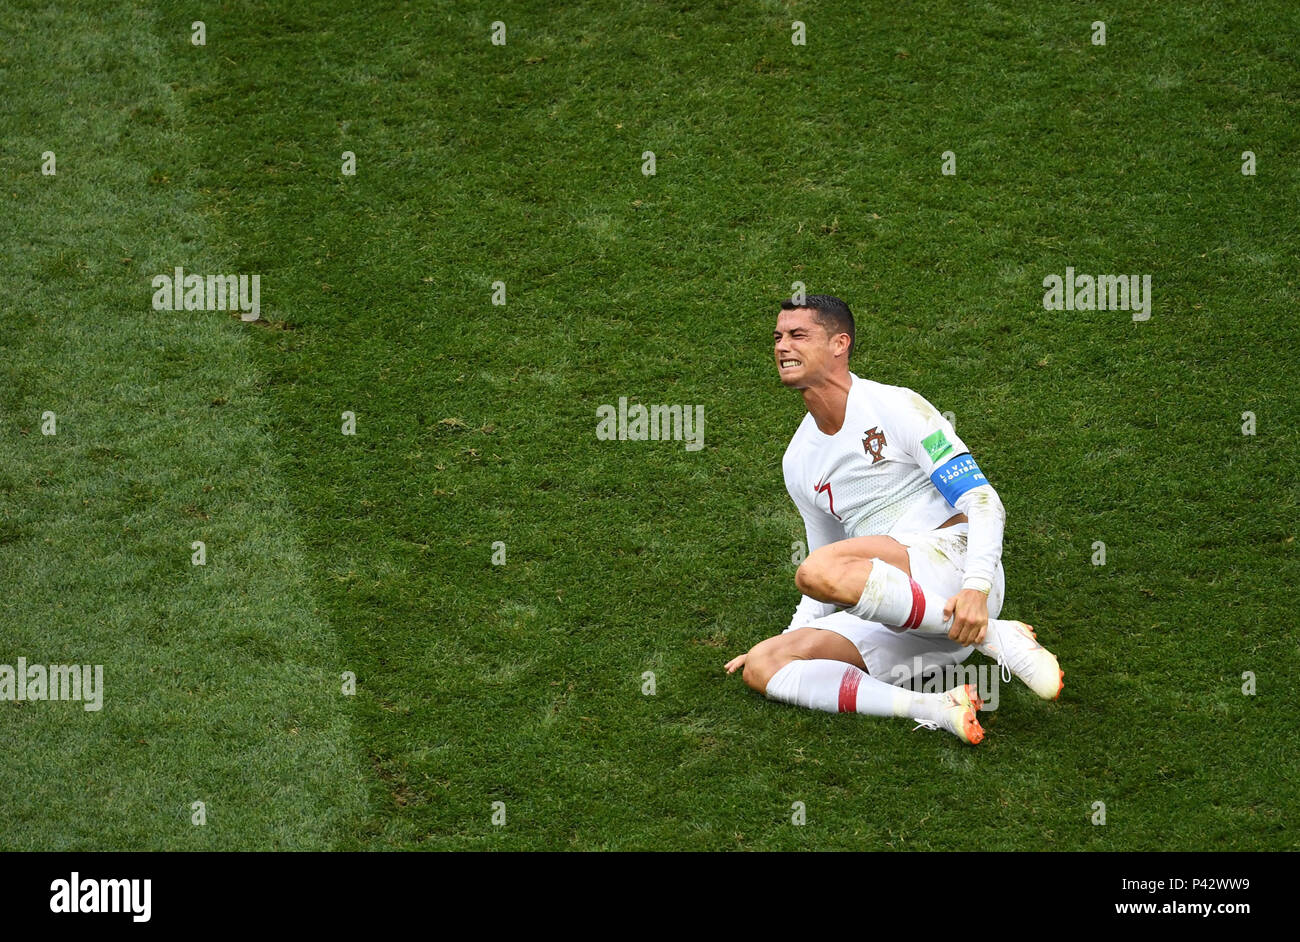 Moscow, Russia. 20th June, 2018. Cristiano Ronaldo of Portugal sustains injury during a Group B match between Portugal and Morocco at the 2018 FIFA World Cup in Moscow, Russia, June 20, 2018. Credit: Wang Yuguo/Xinhua/Alamy Live News Stock Photo